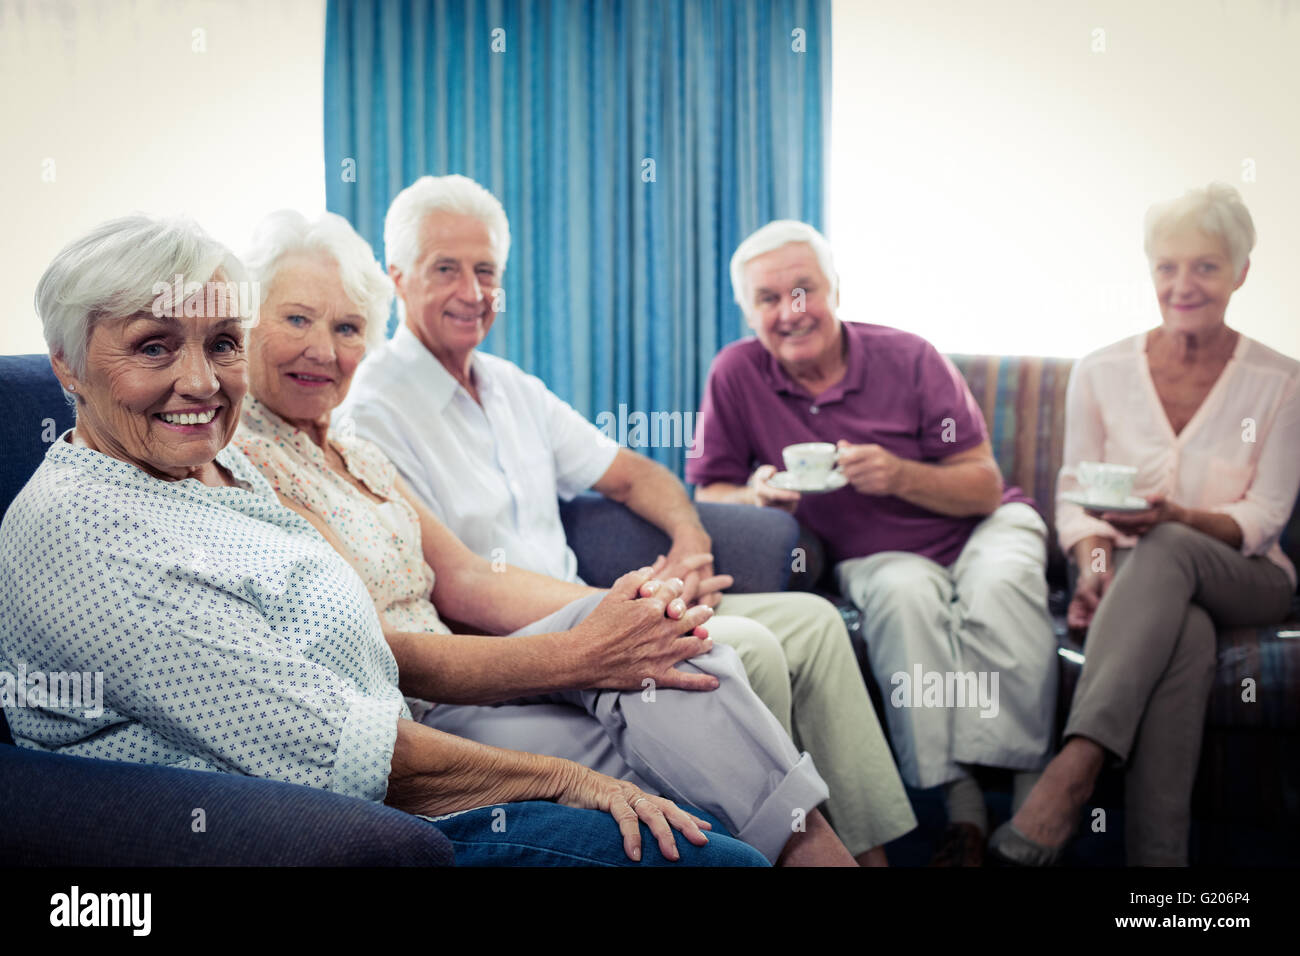 Portrait of a group of seniors Stock Photo